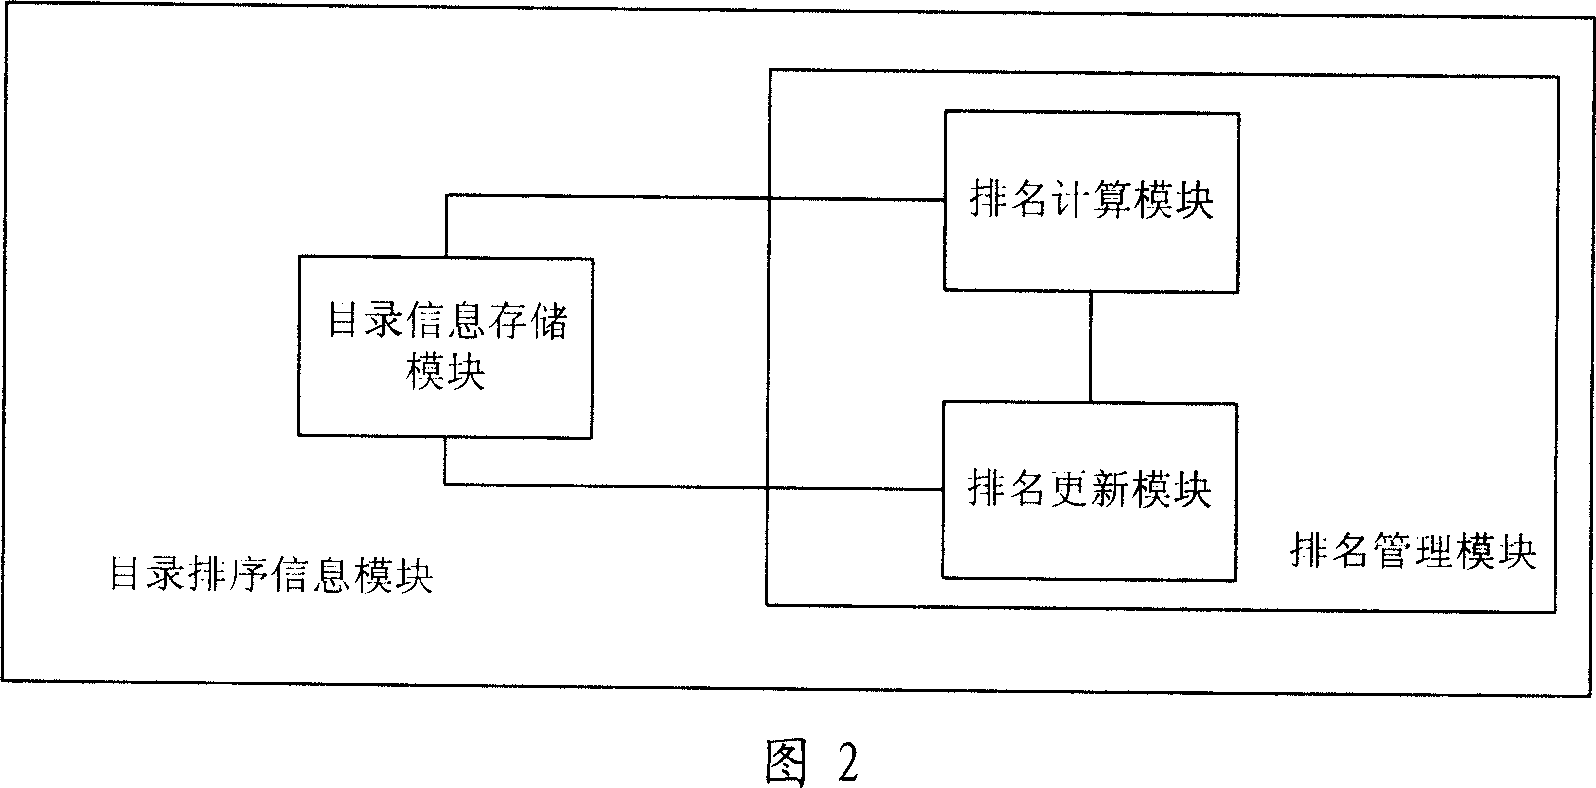 Structuring system and method of network community dynamic list